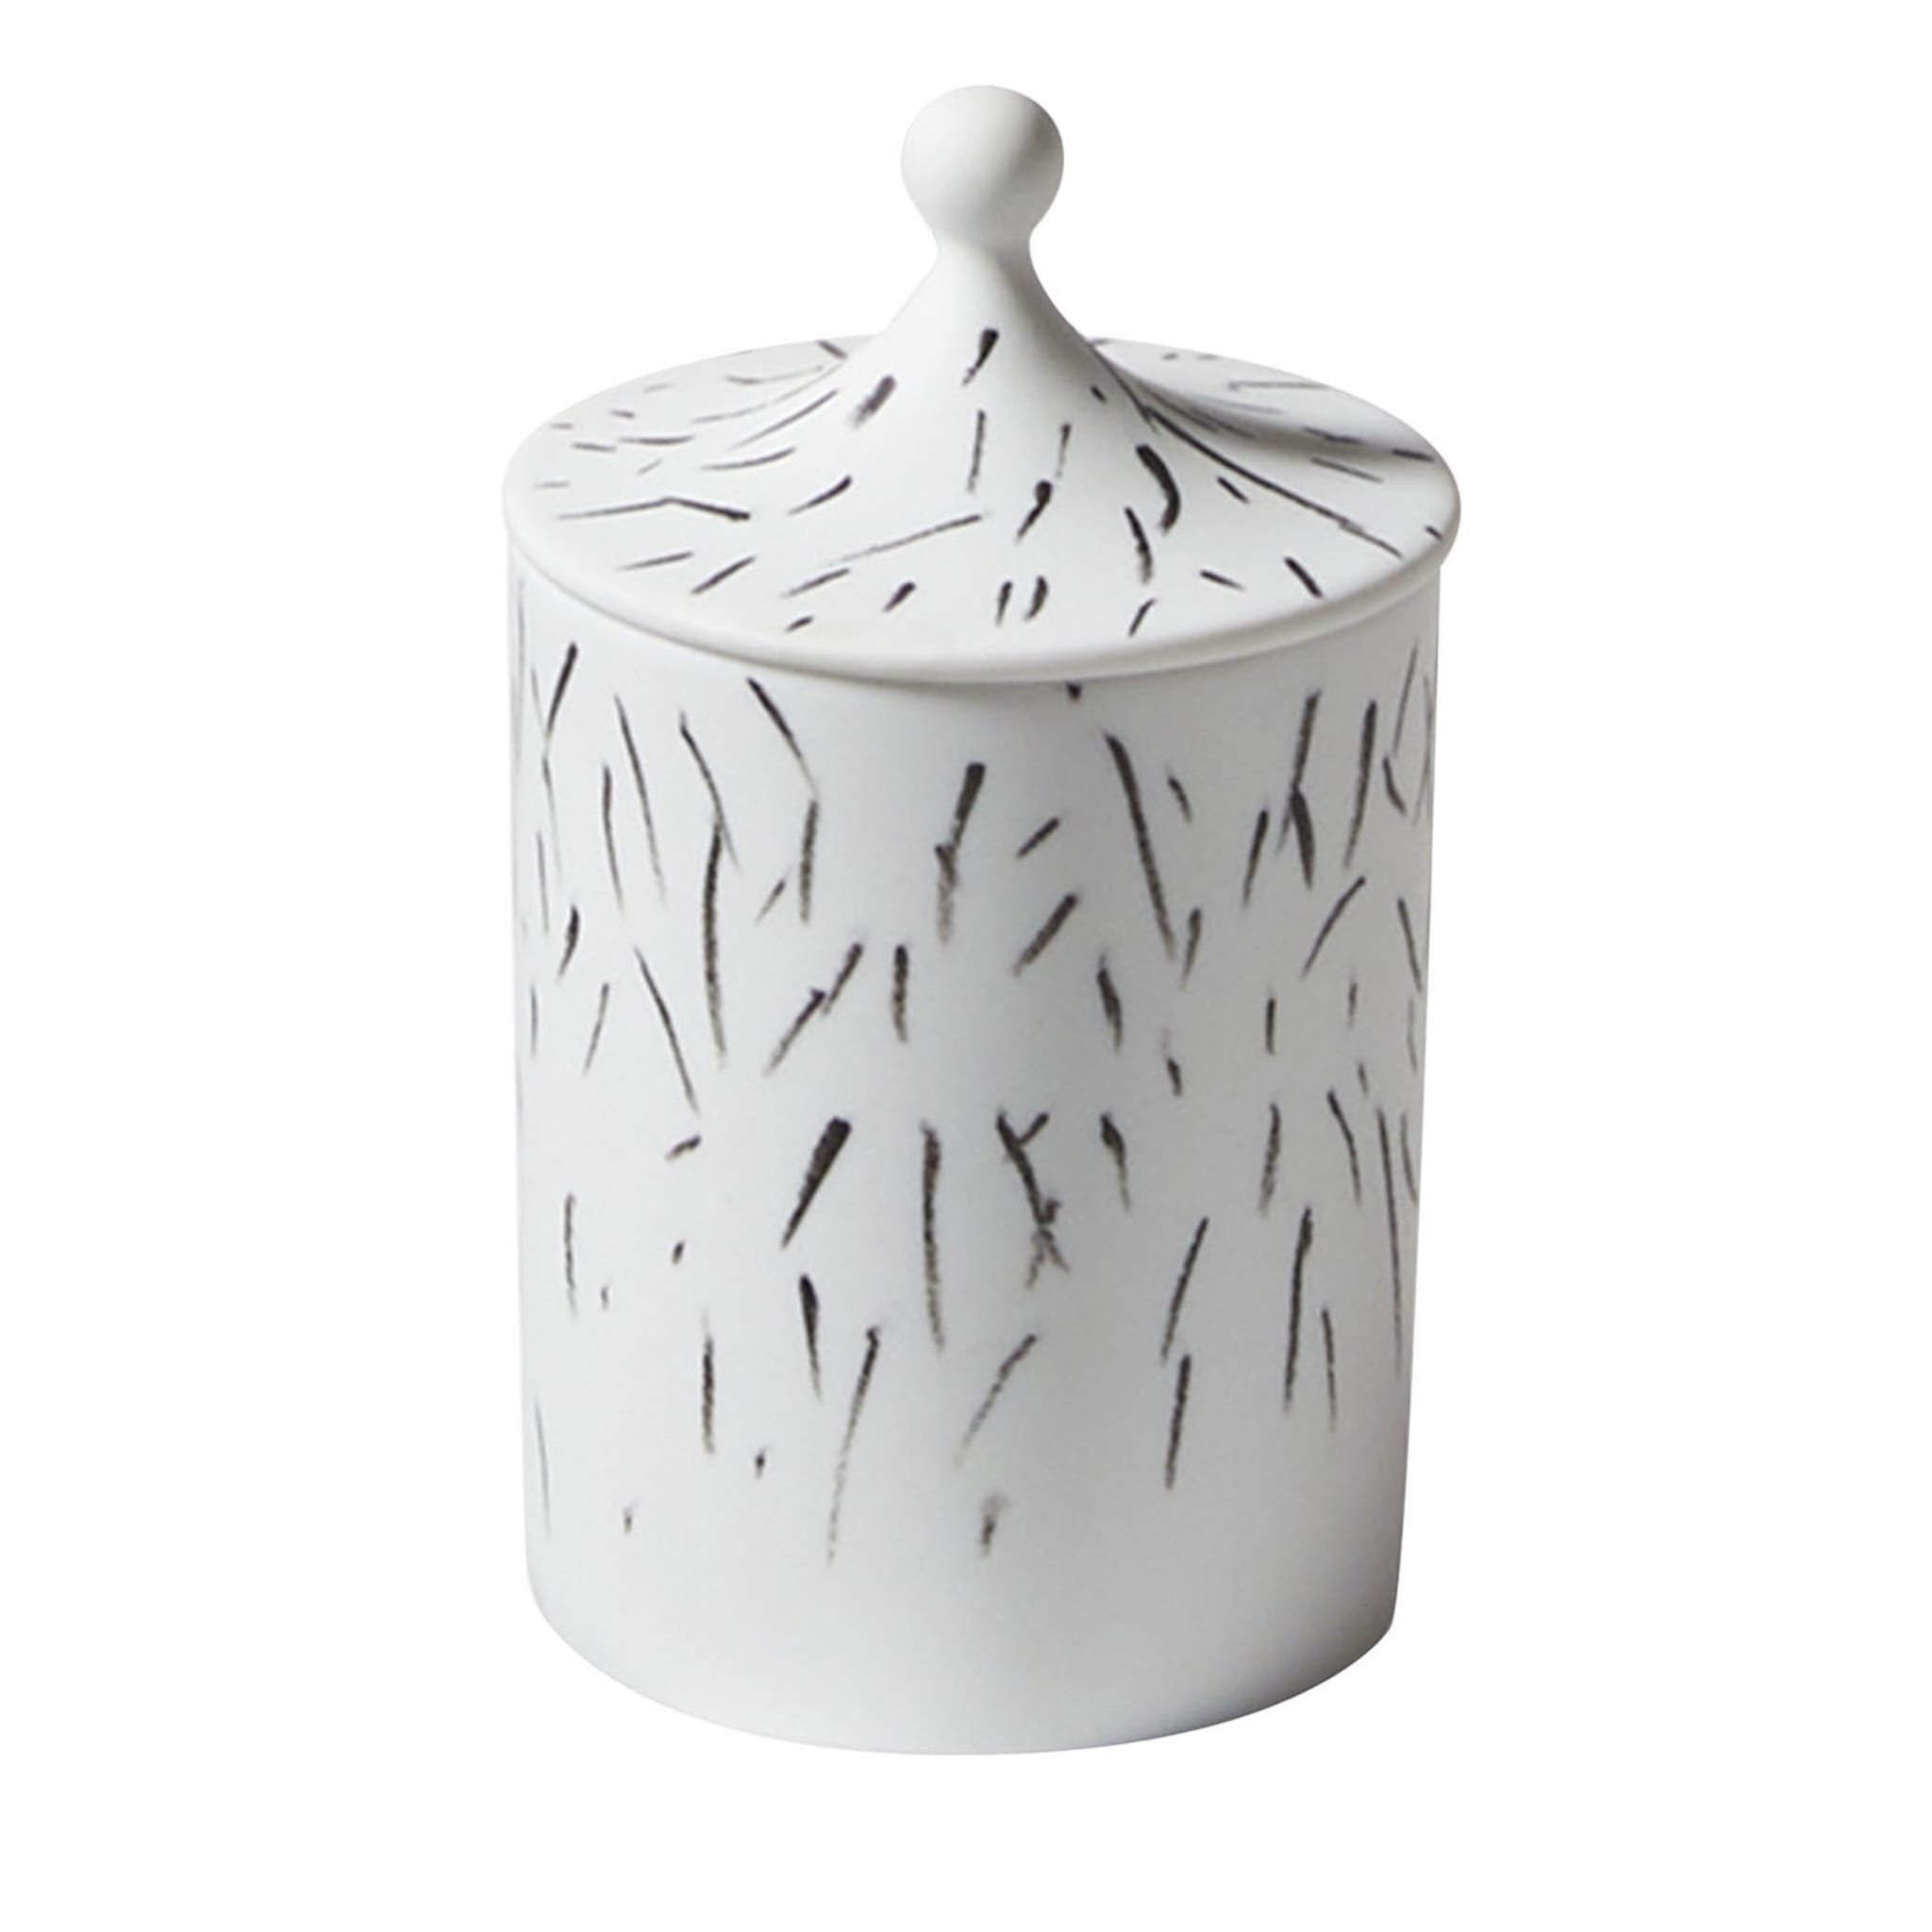 Post Scriptum Black&White Candle Holder with Lid by Formafantasma - Main view